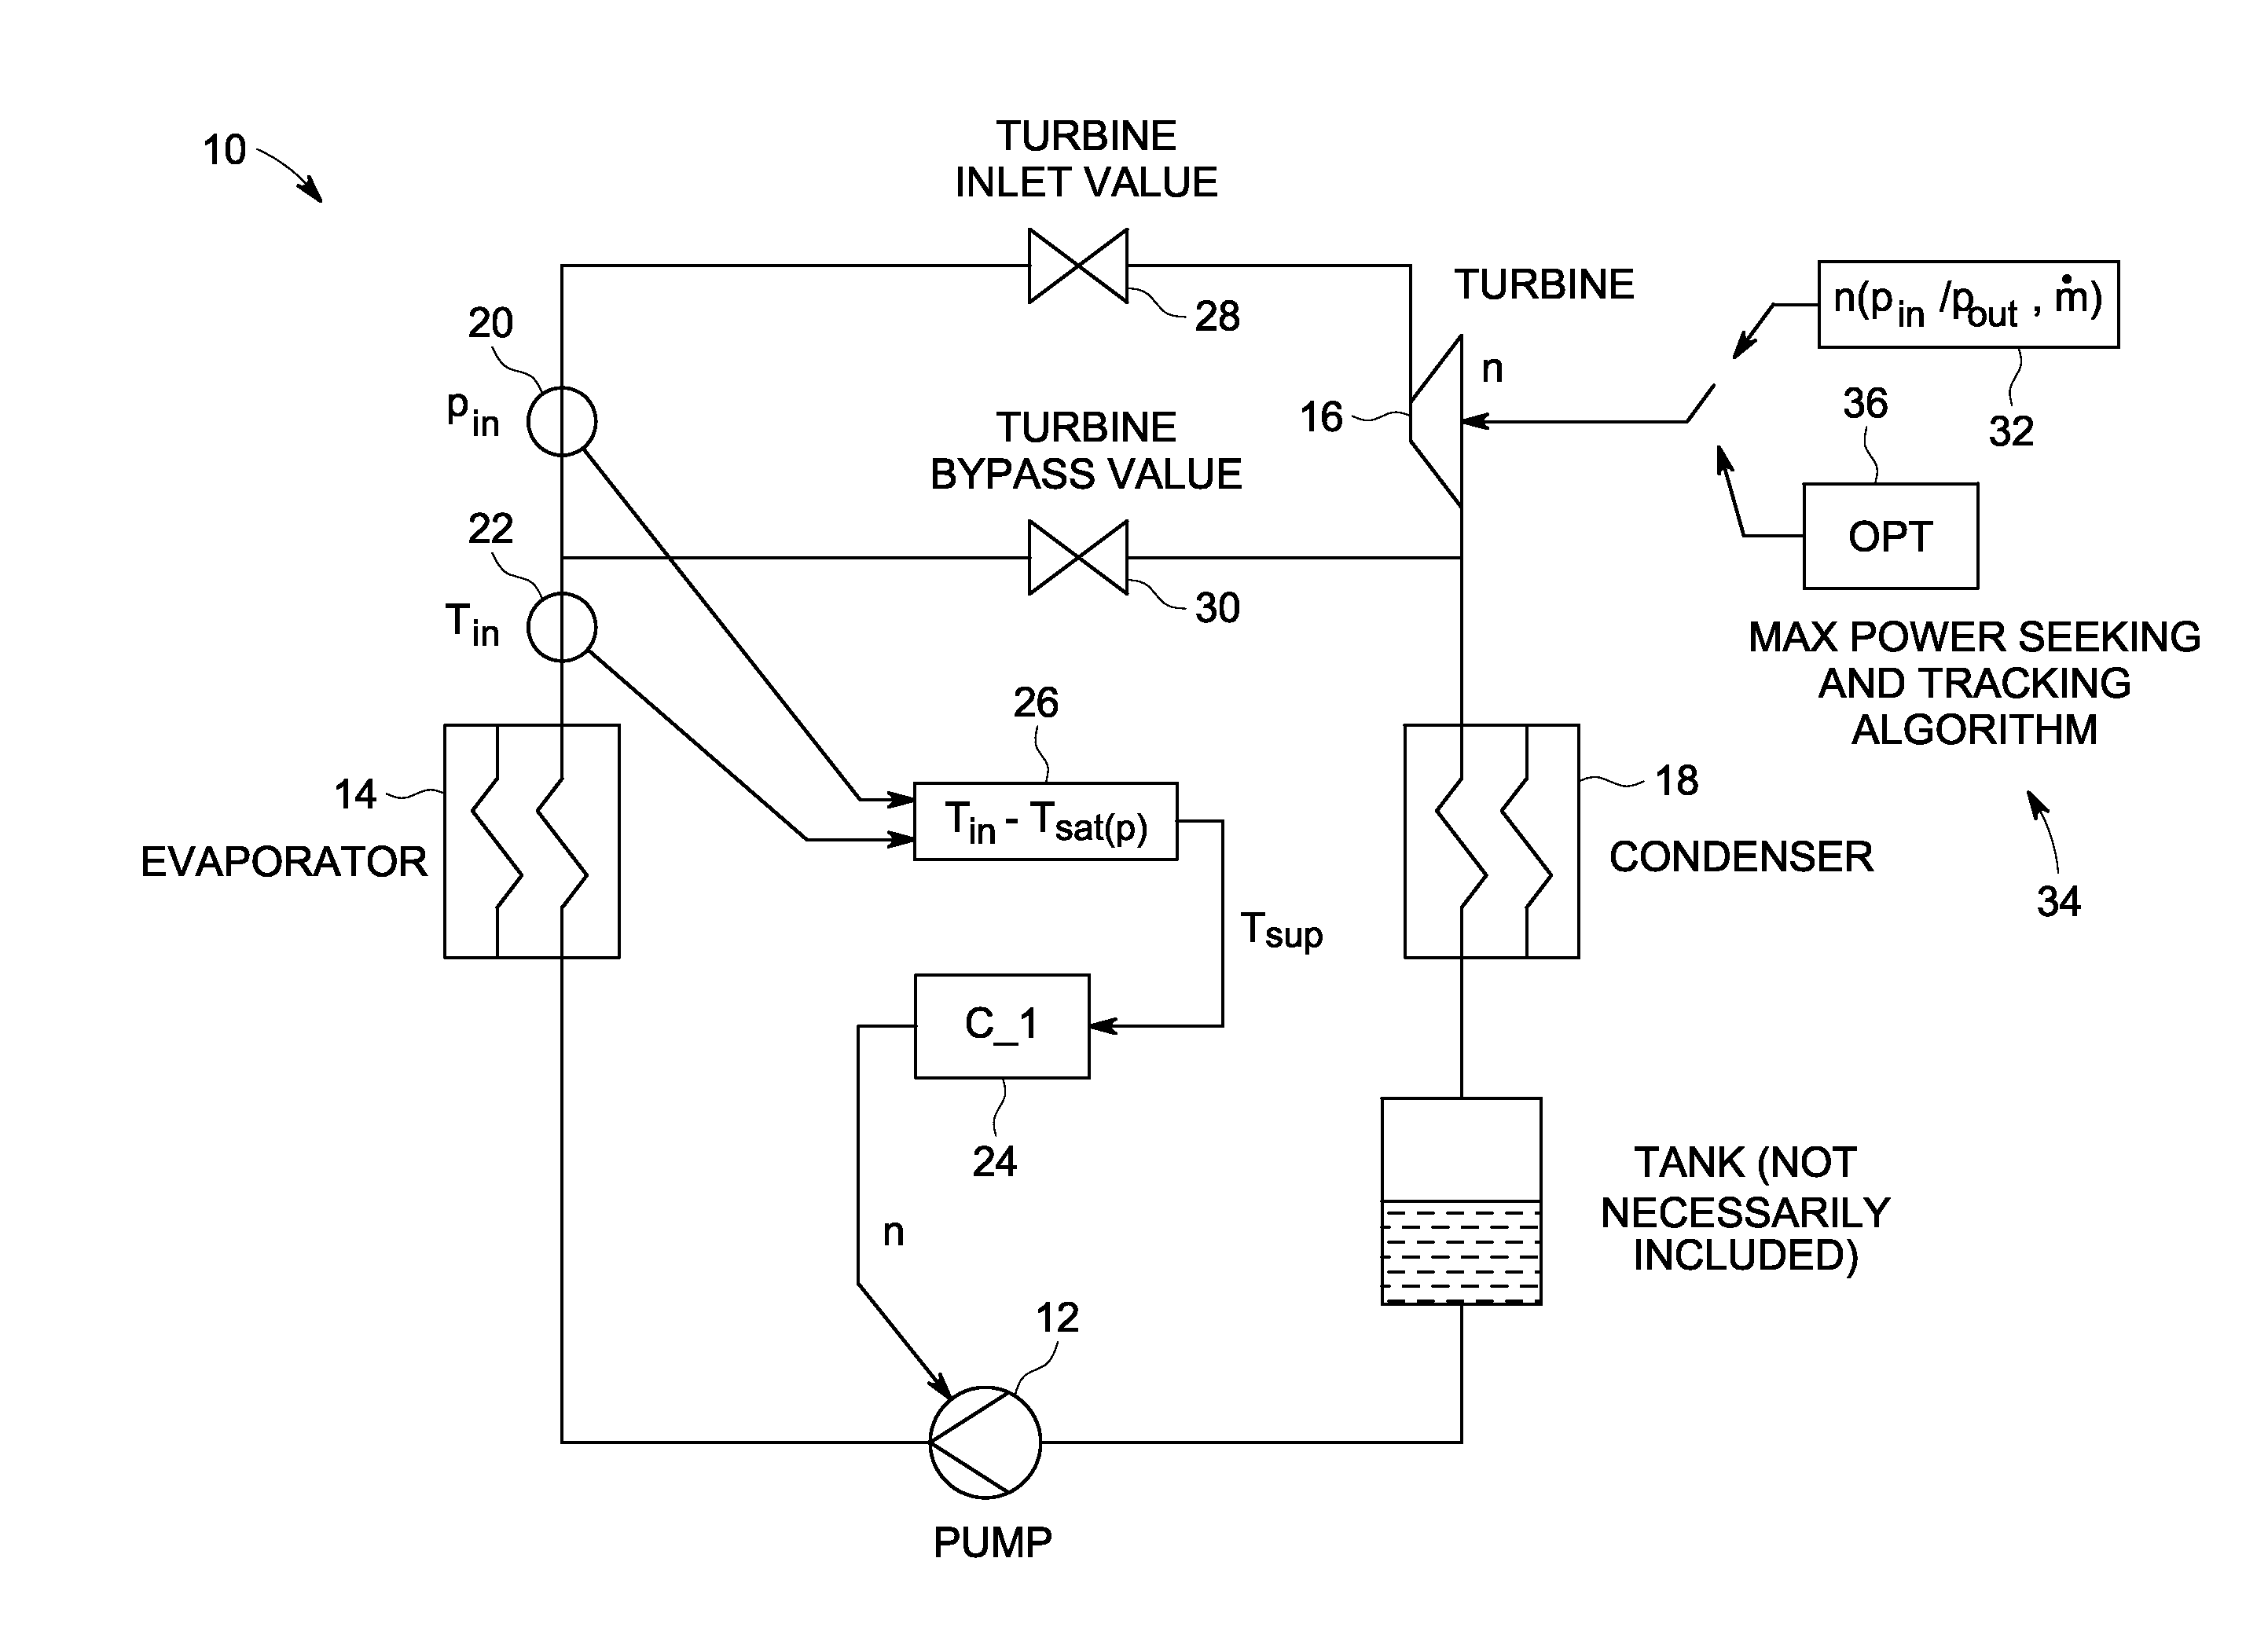 Turbine inlet condition controlled organic rankine cycle